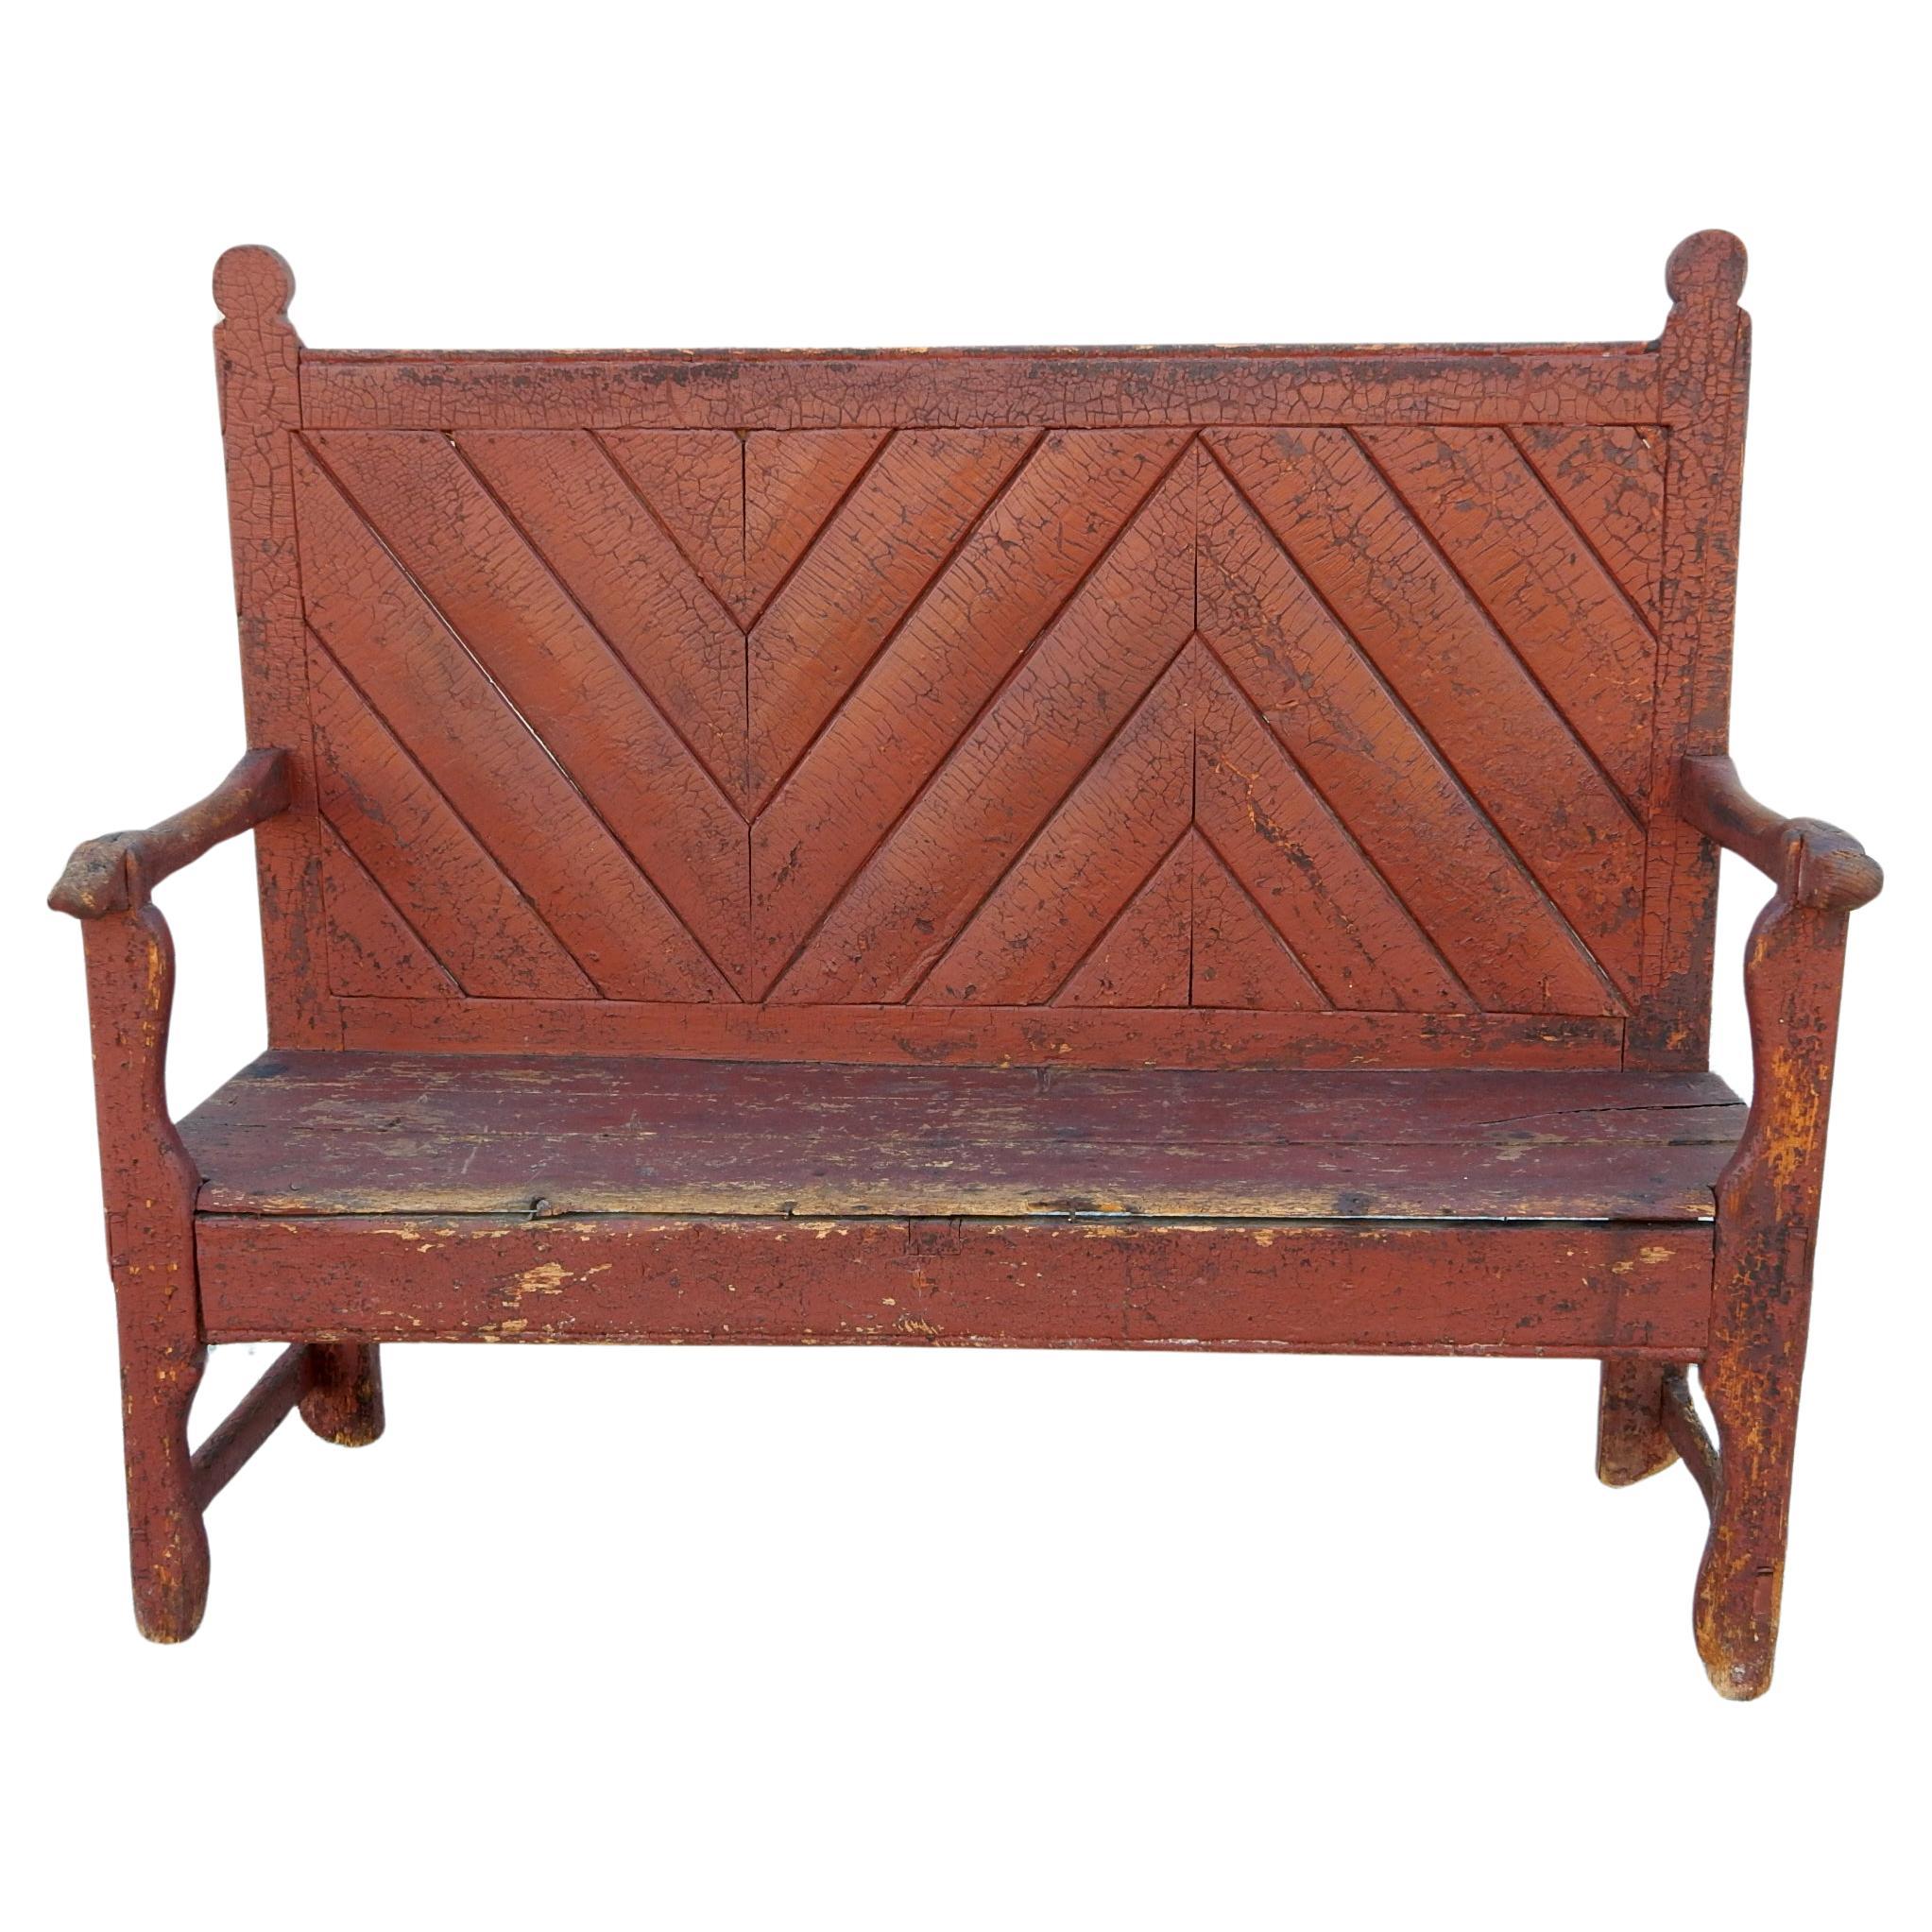 A very handsome early 19th century painted bench from the Catalan region of Spain. Soundly constructed from pine. Wonderful aged patina and wear.
No repairs, completely original.